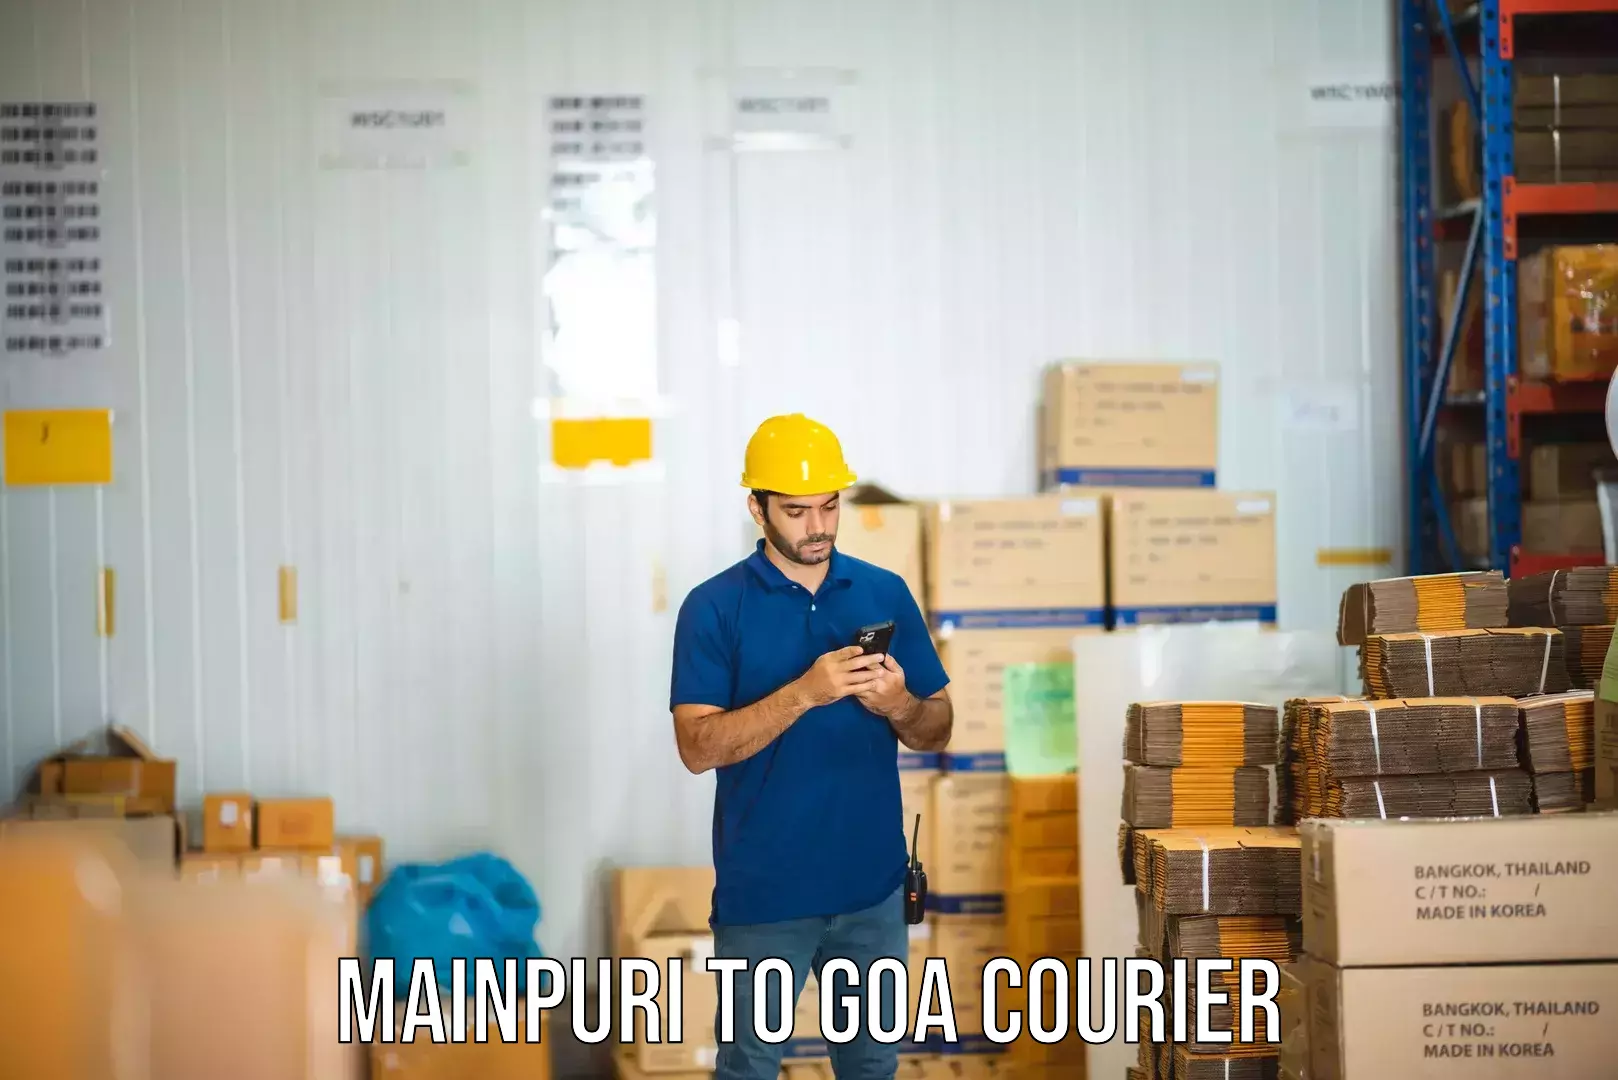 User-friendly delivery service Mainpuri to South Goa